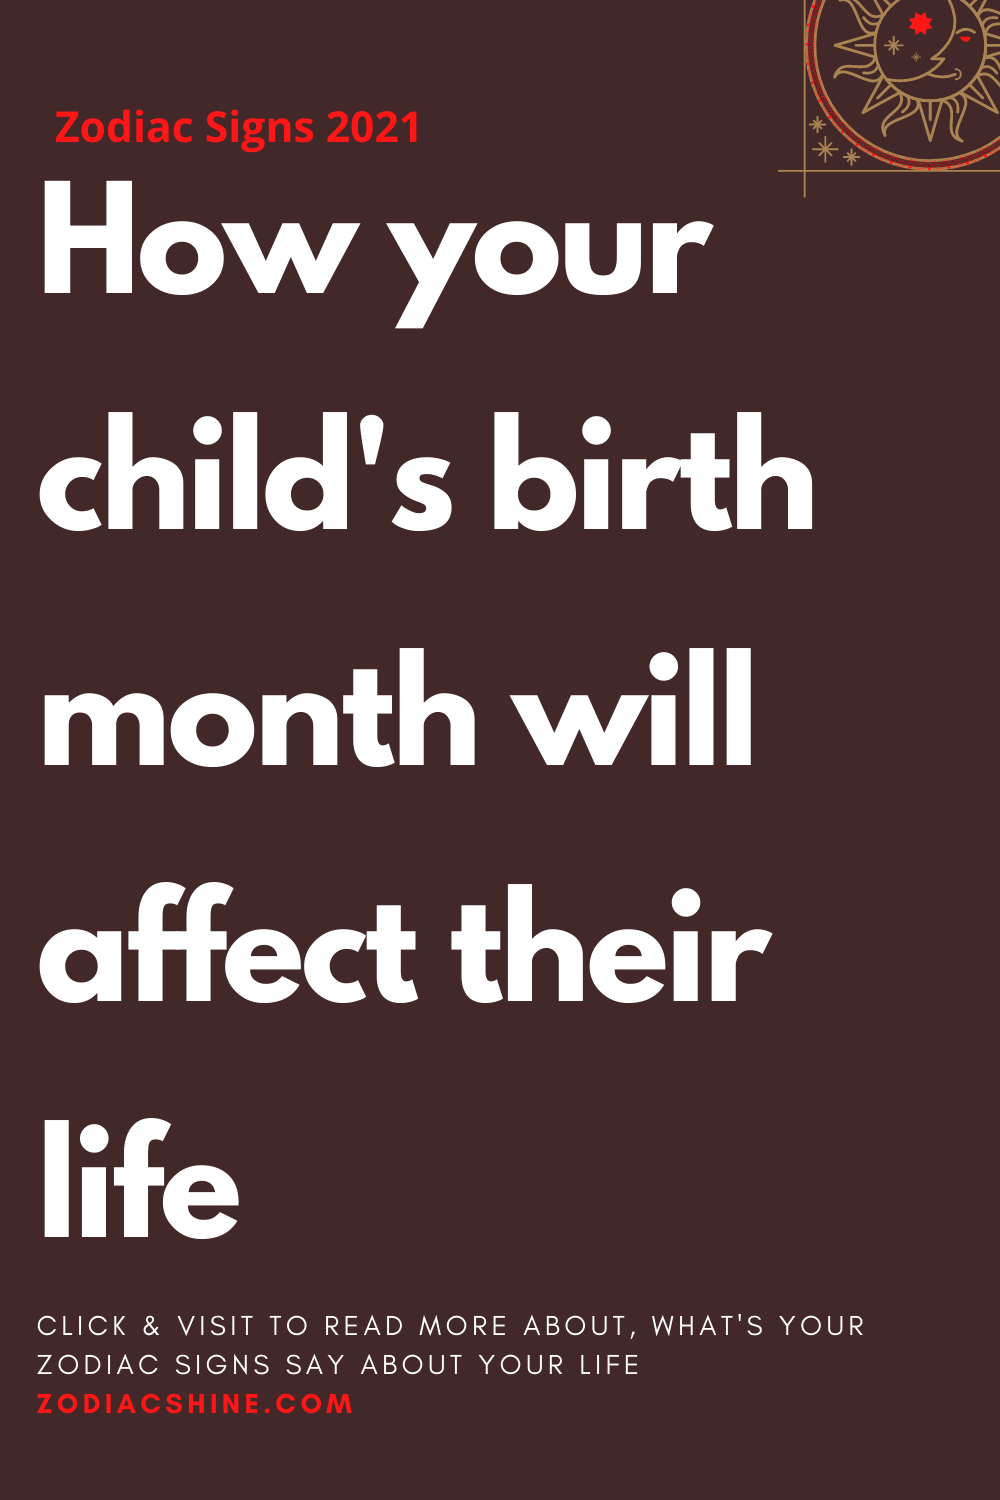 How your child's birth month will affect their life